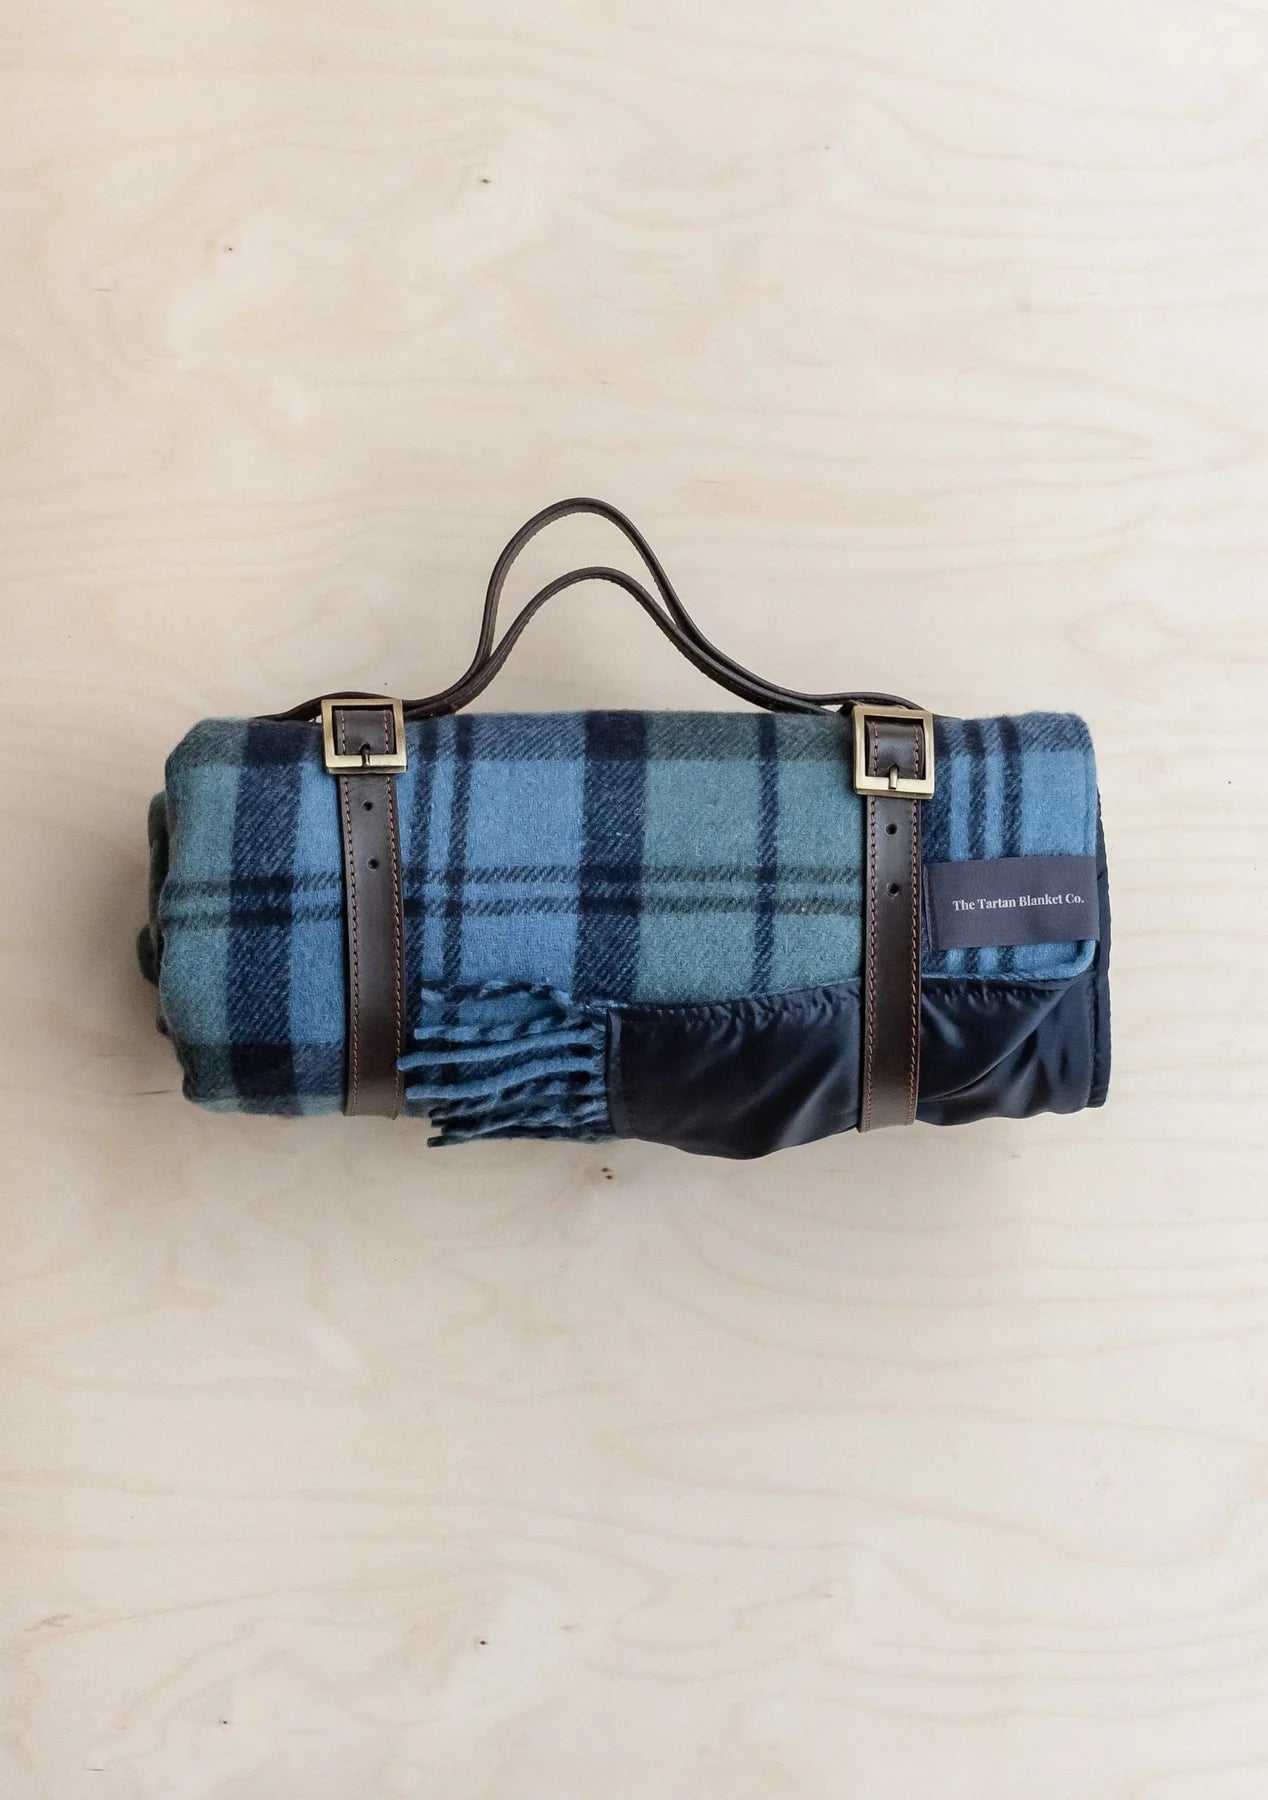 Picnic Blanket in Campbell of Argyll Ancient Tartan | TBCo | Scottish Creations